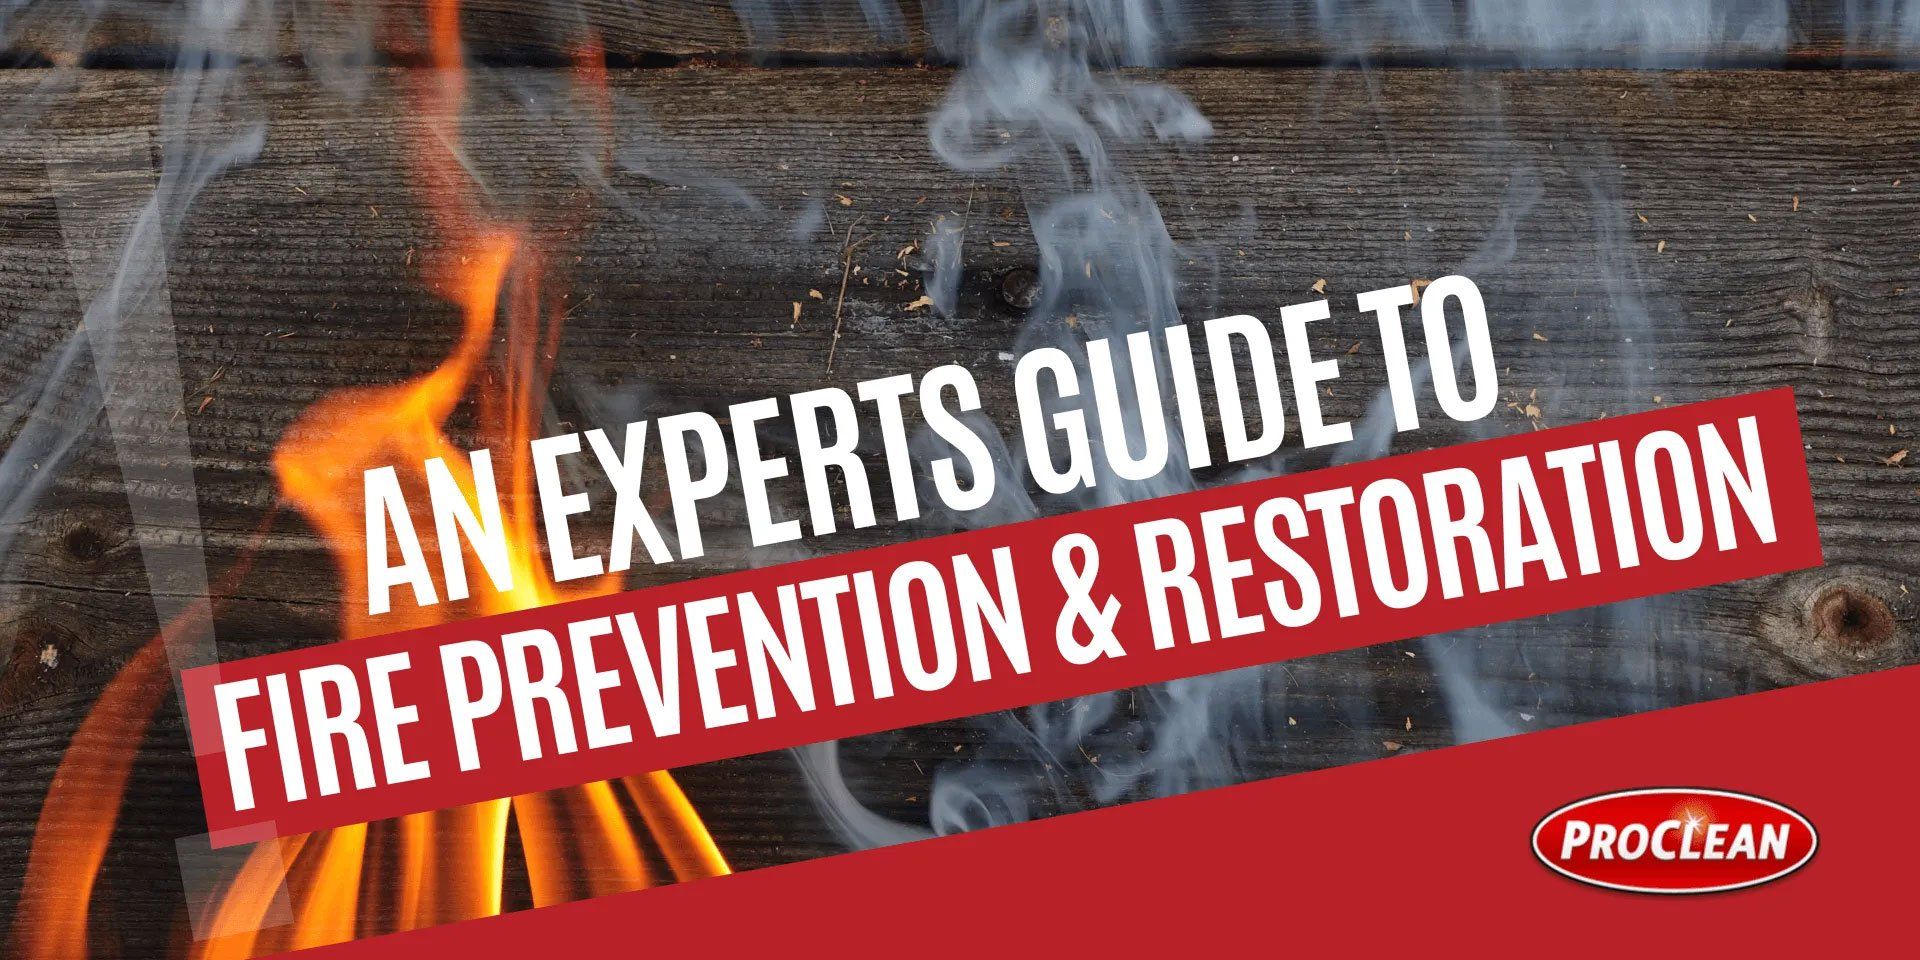 Residential Fires: An Expert’s Guide to Prevention & Restoration